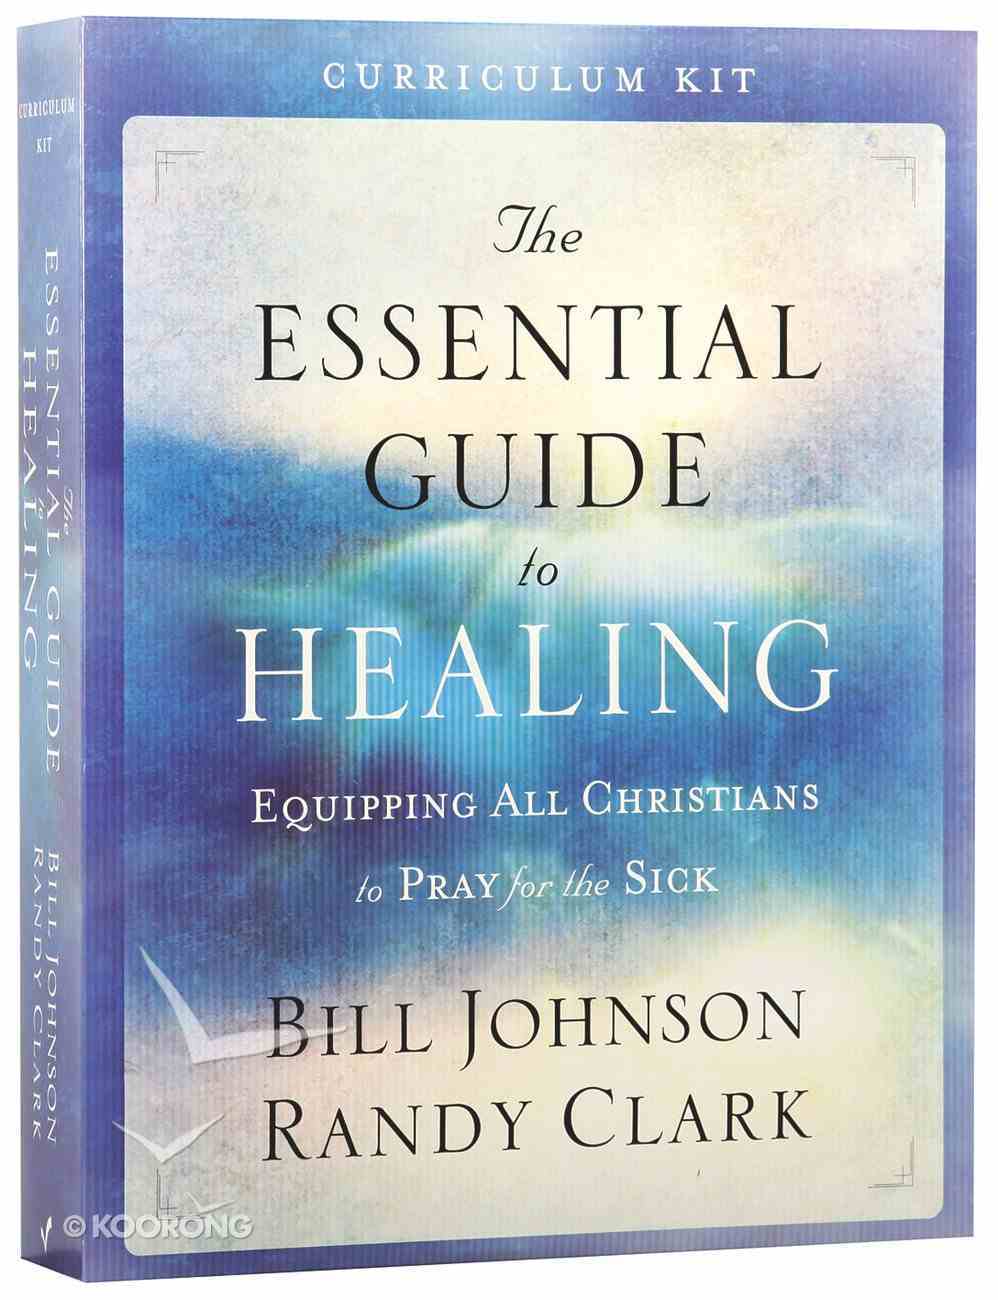 The Essential Guide to Healing (Curriculum Kit) Pack